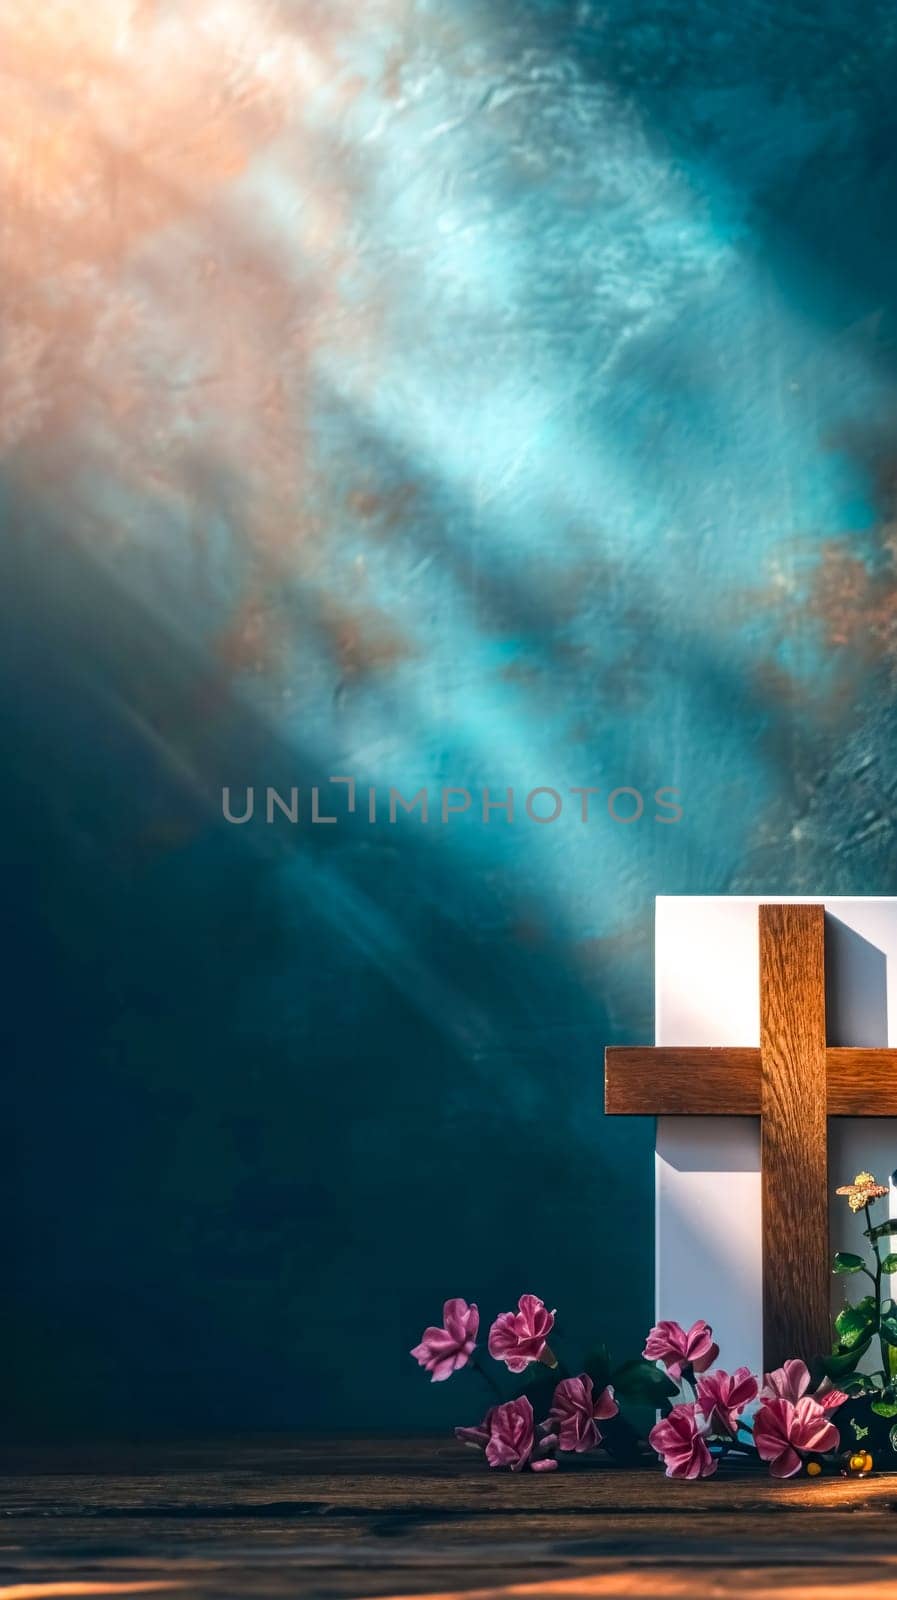 simple wooden cross against a radiant blue background, adorned with delicate pink flowers at its base, conveying a message of peace, spirituality, and the beauty of faith. vertical, copy space